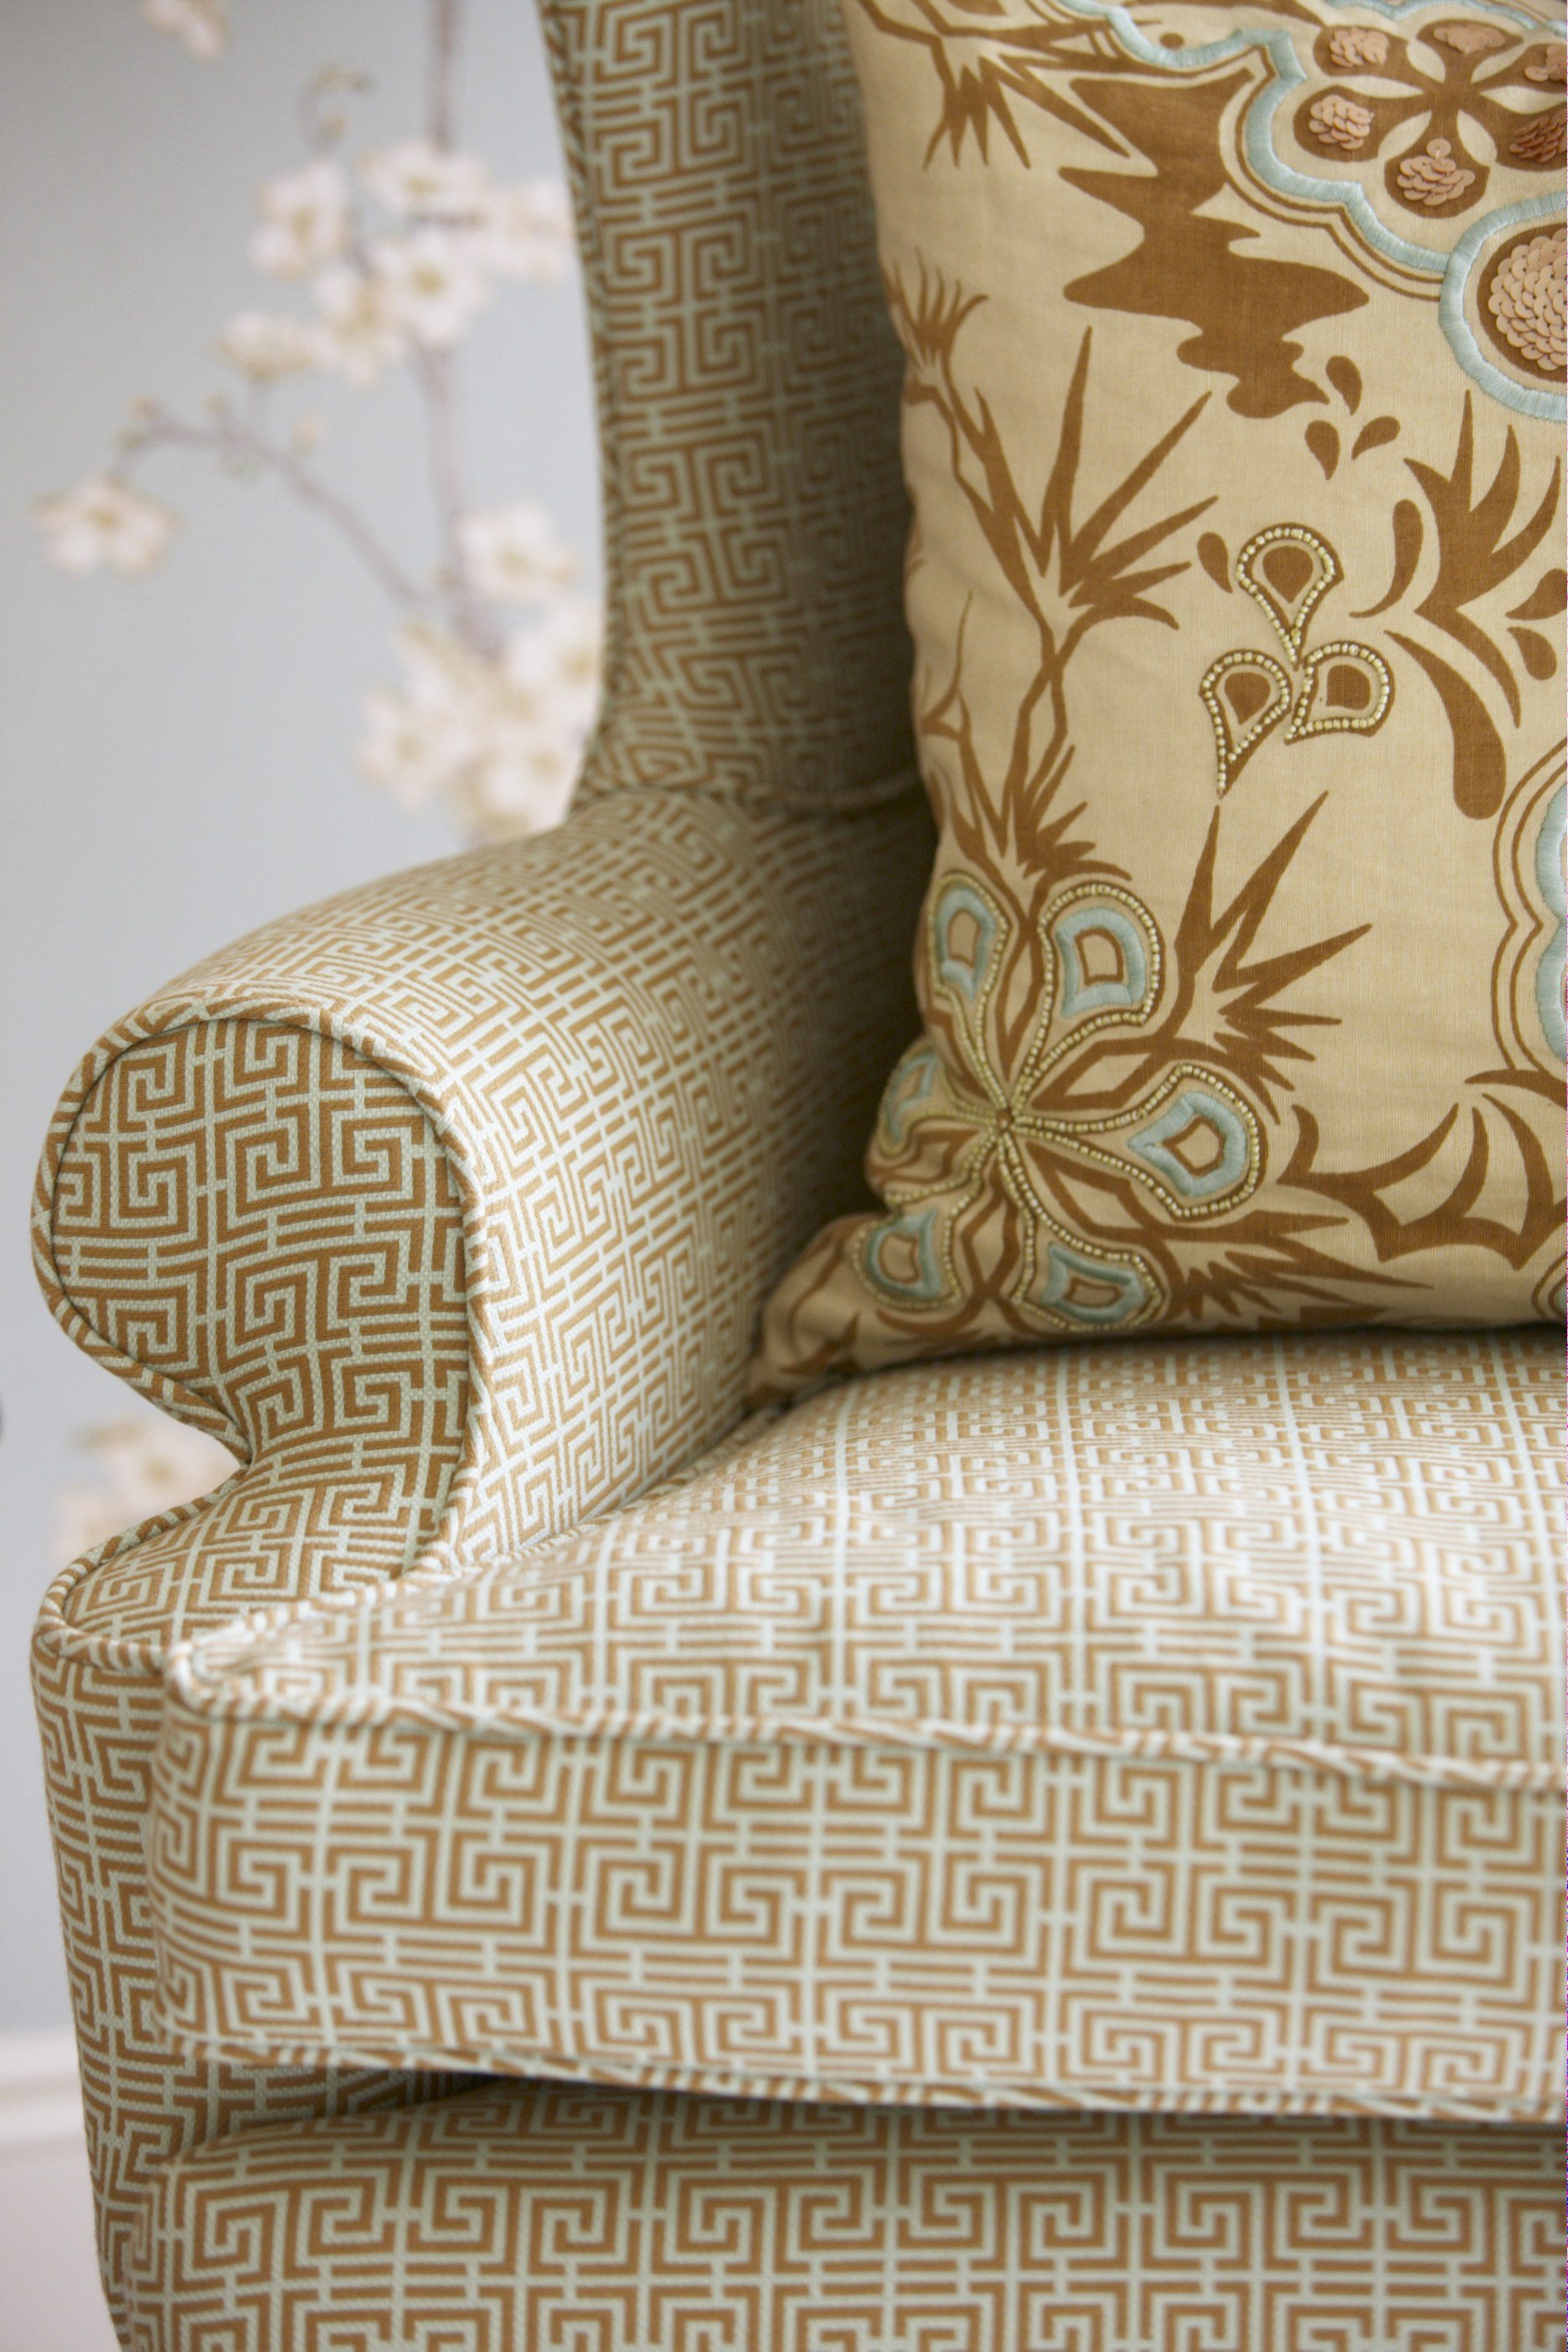 20-chair-pattern-detail-pillow-transitional-colonial-greenwich-connecticut.jpg